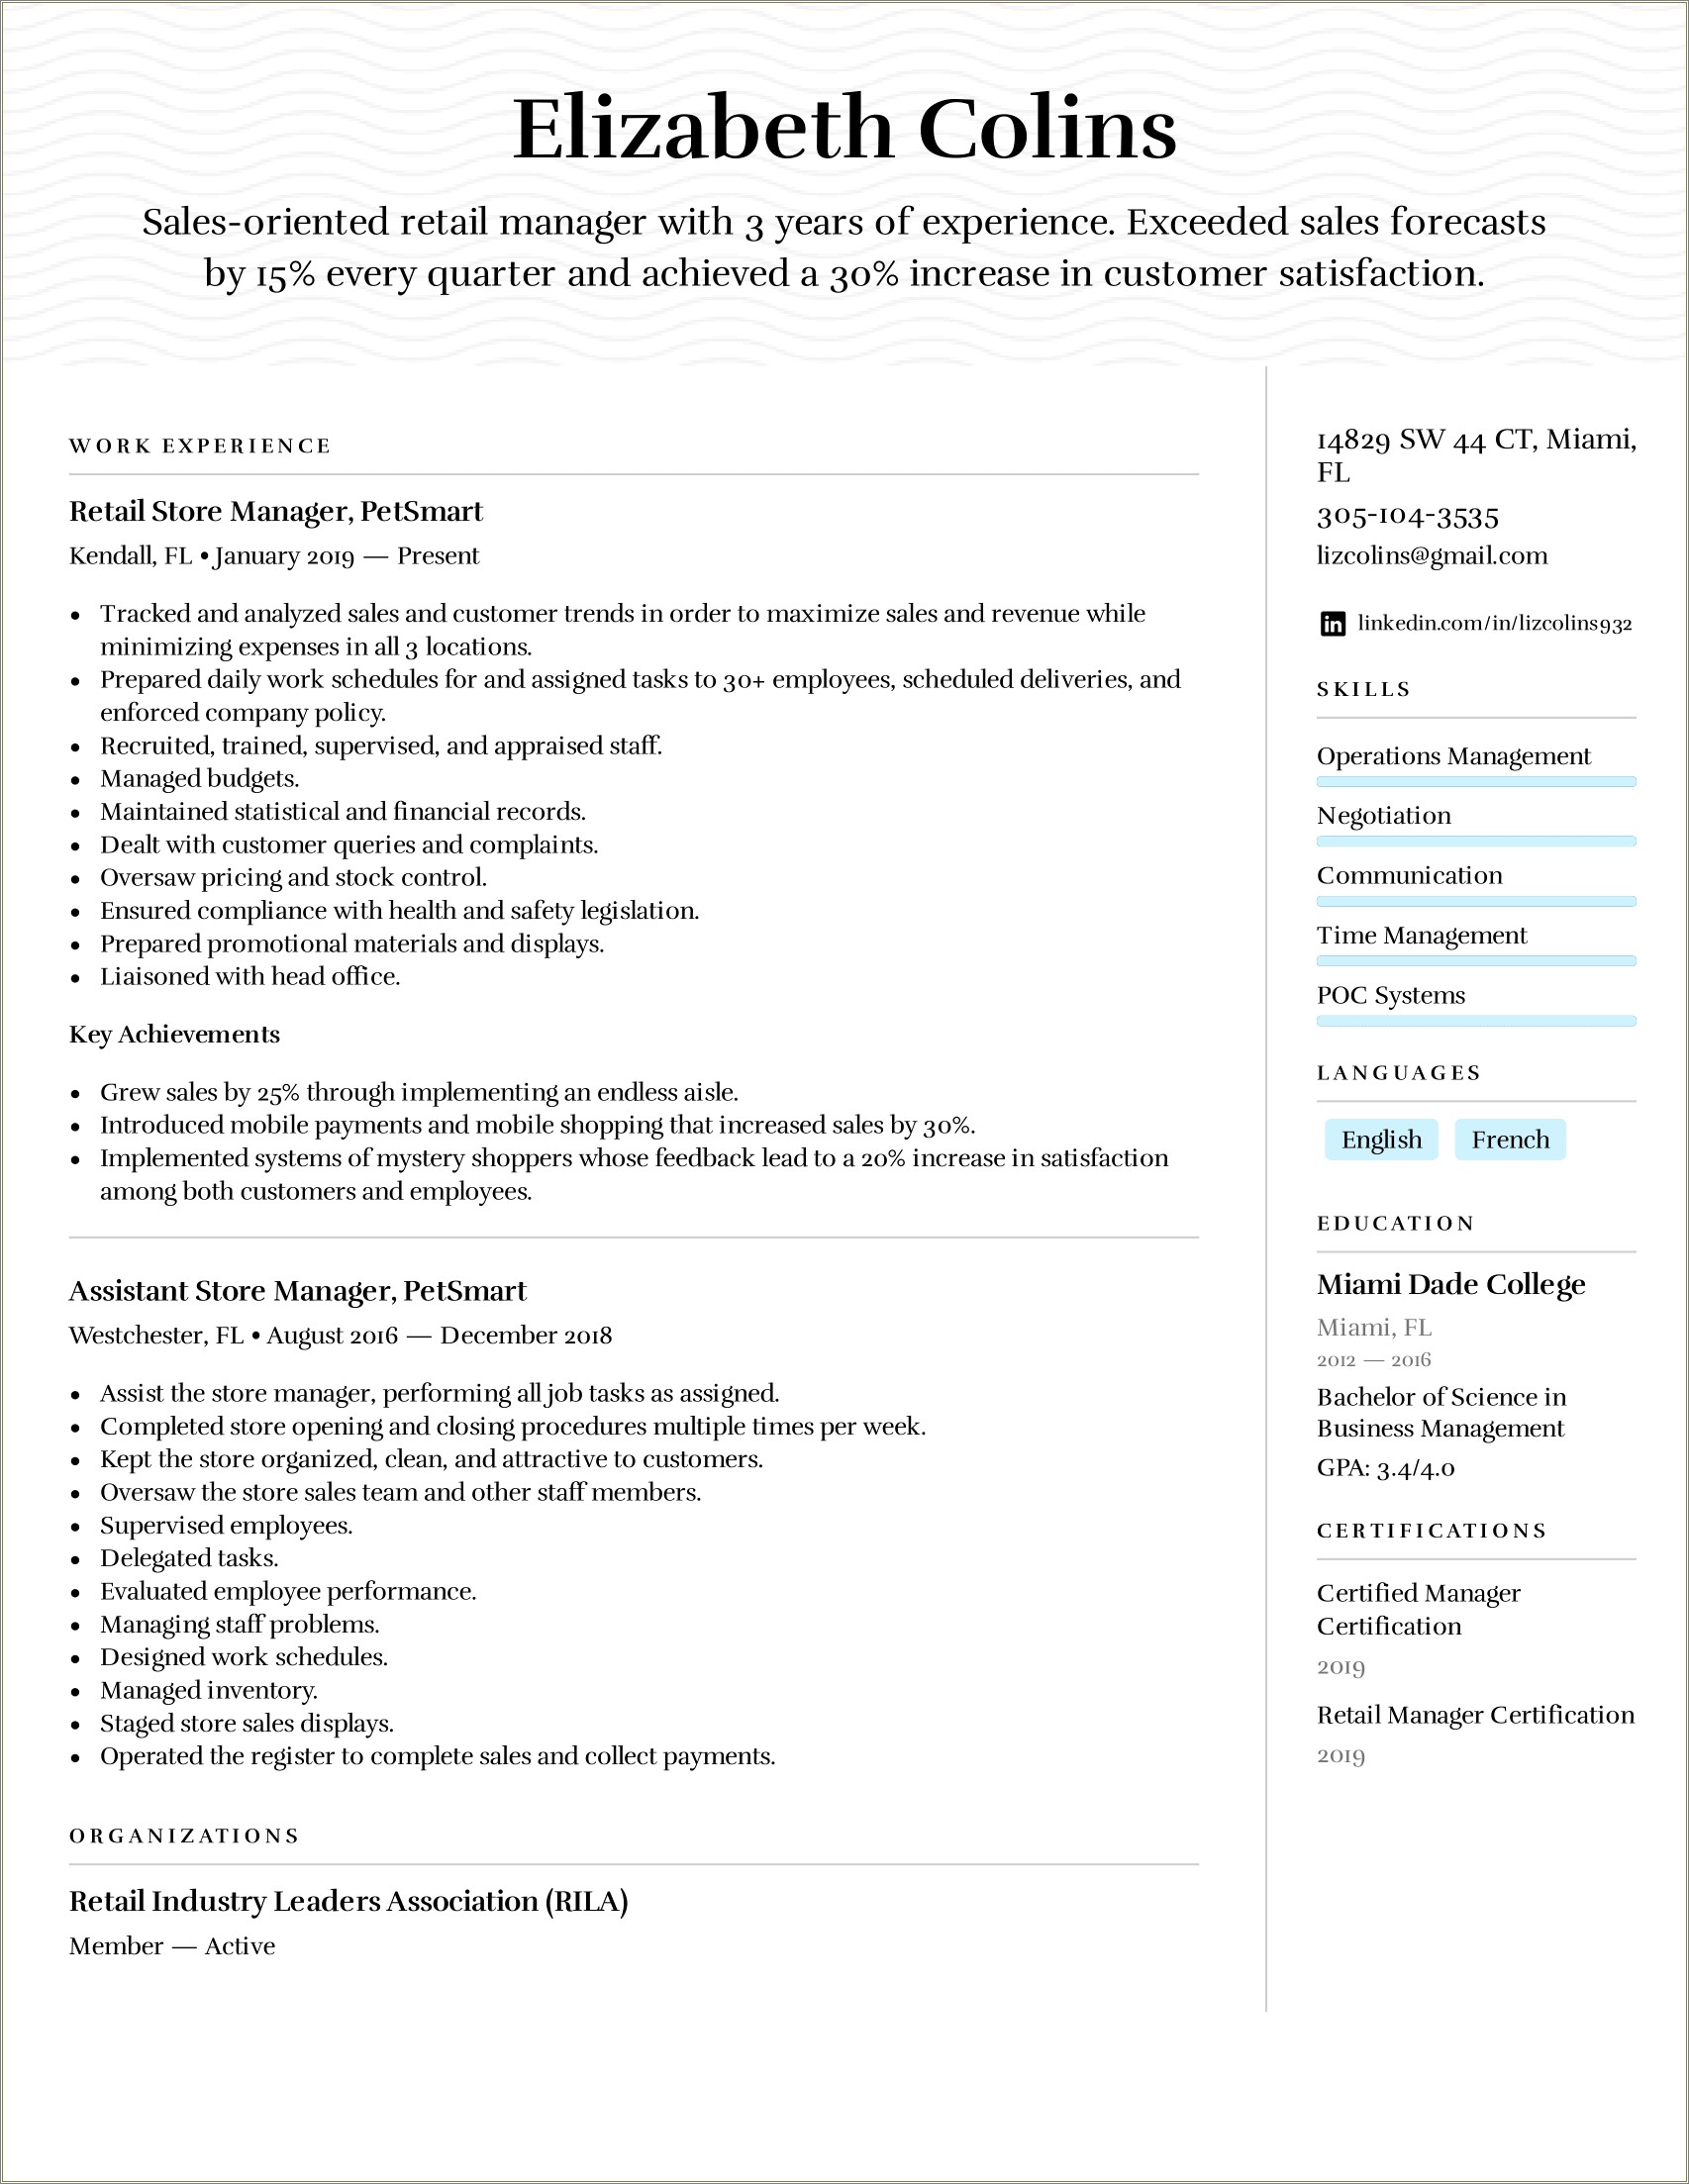 Best Qualifications For Retail On A Resume